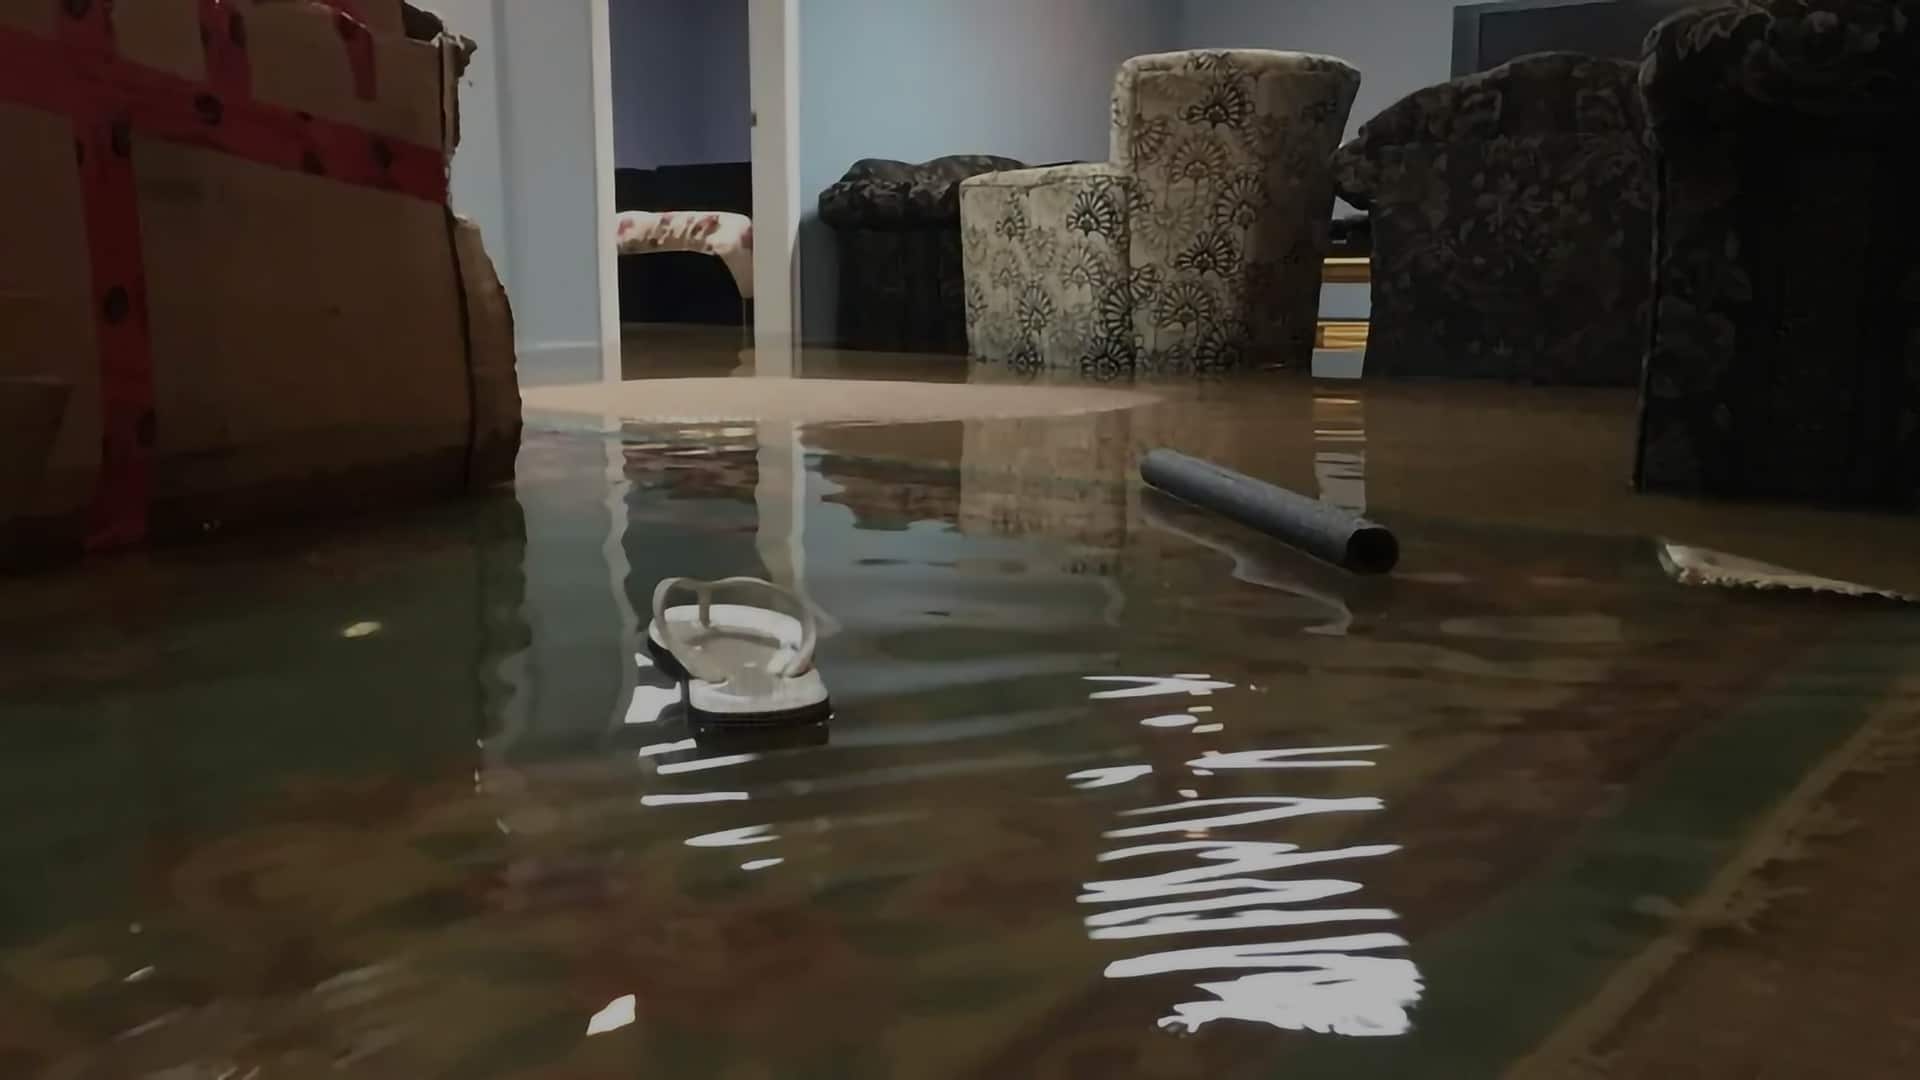 water-damage-featured-image-1920x1080